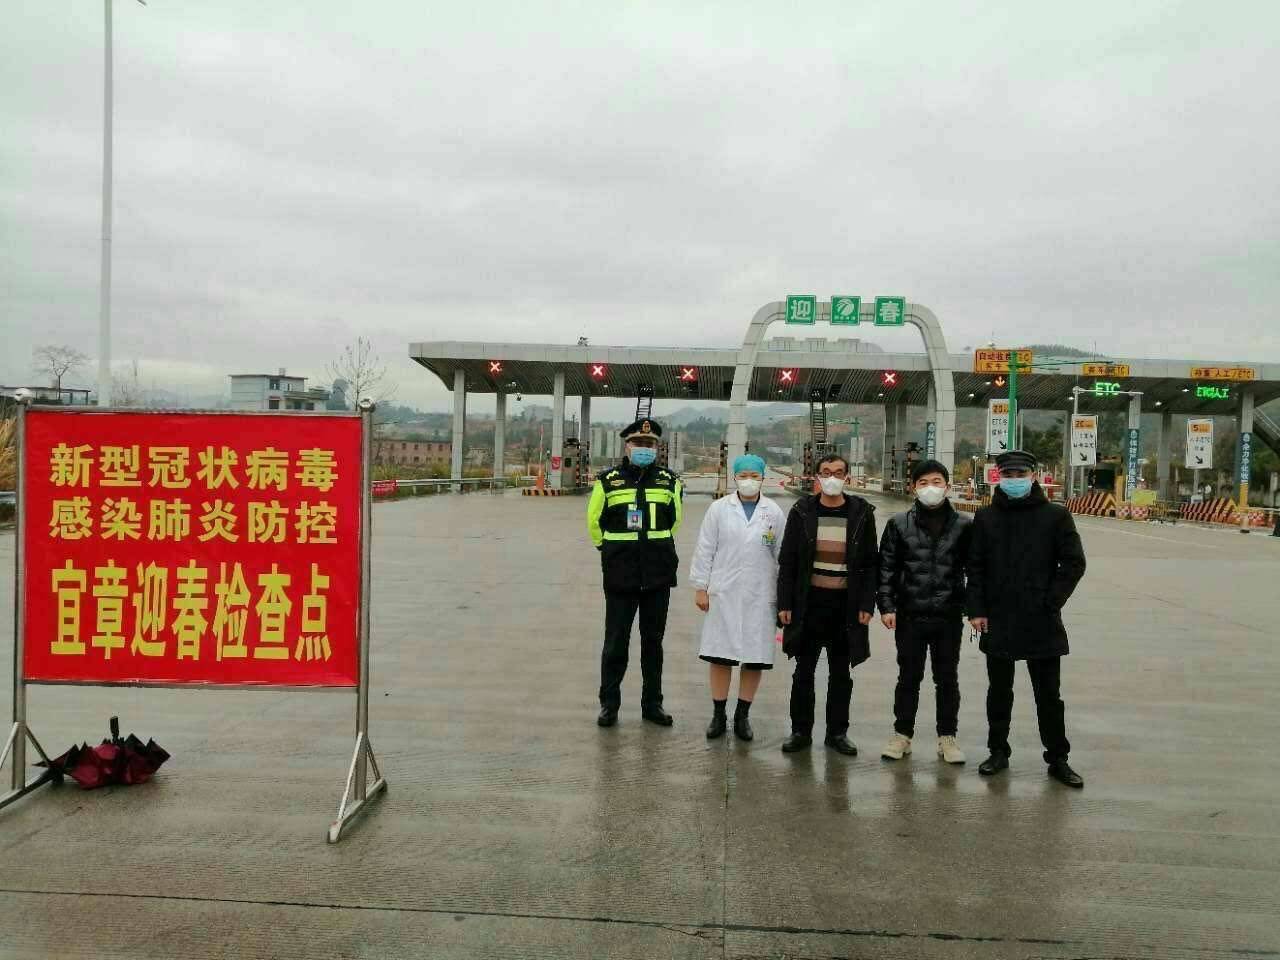 Unprecedented measures to prevent the spread of the virus in China.